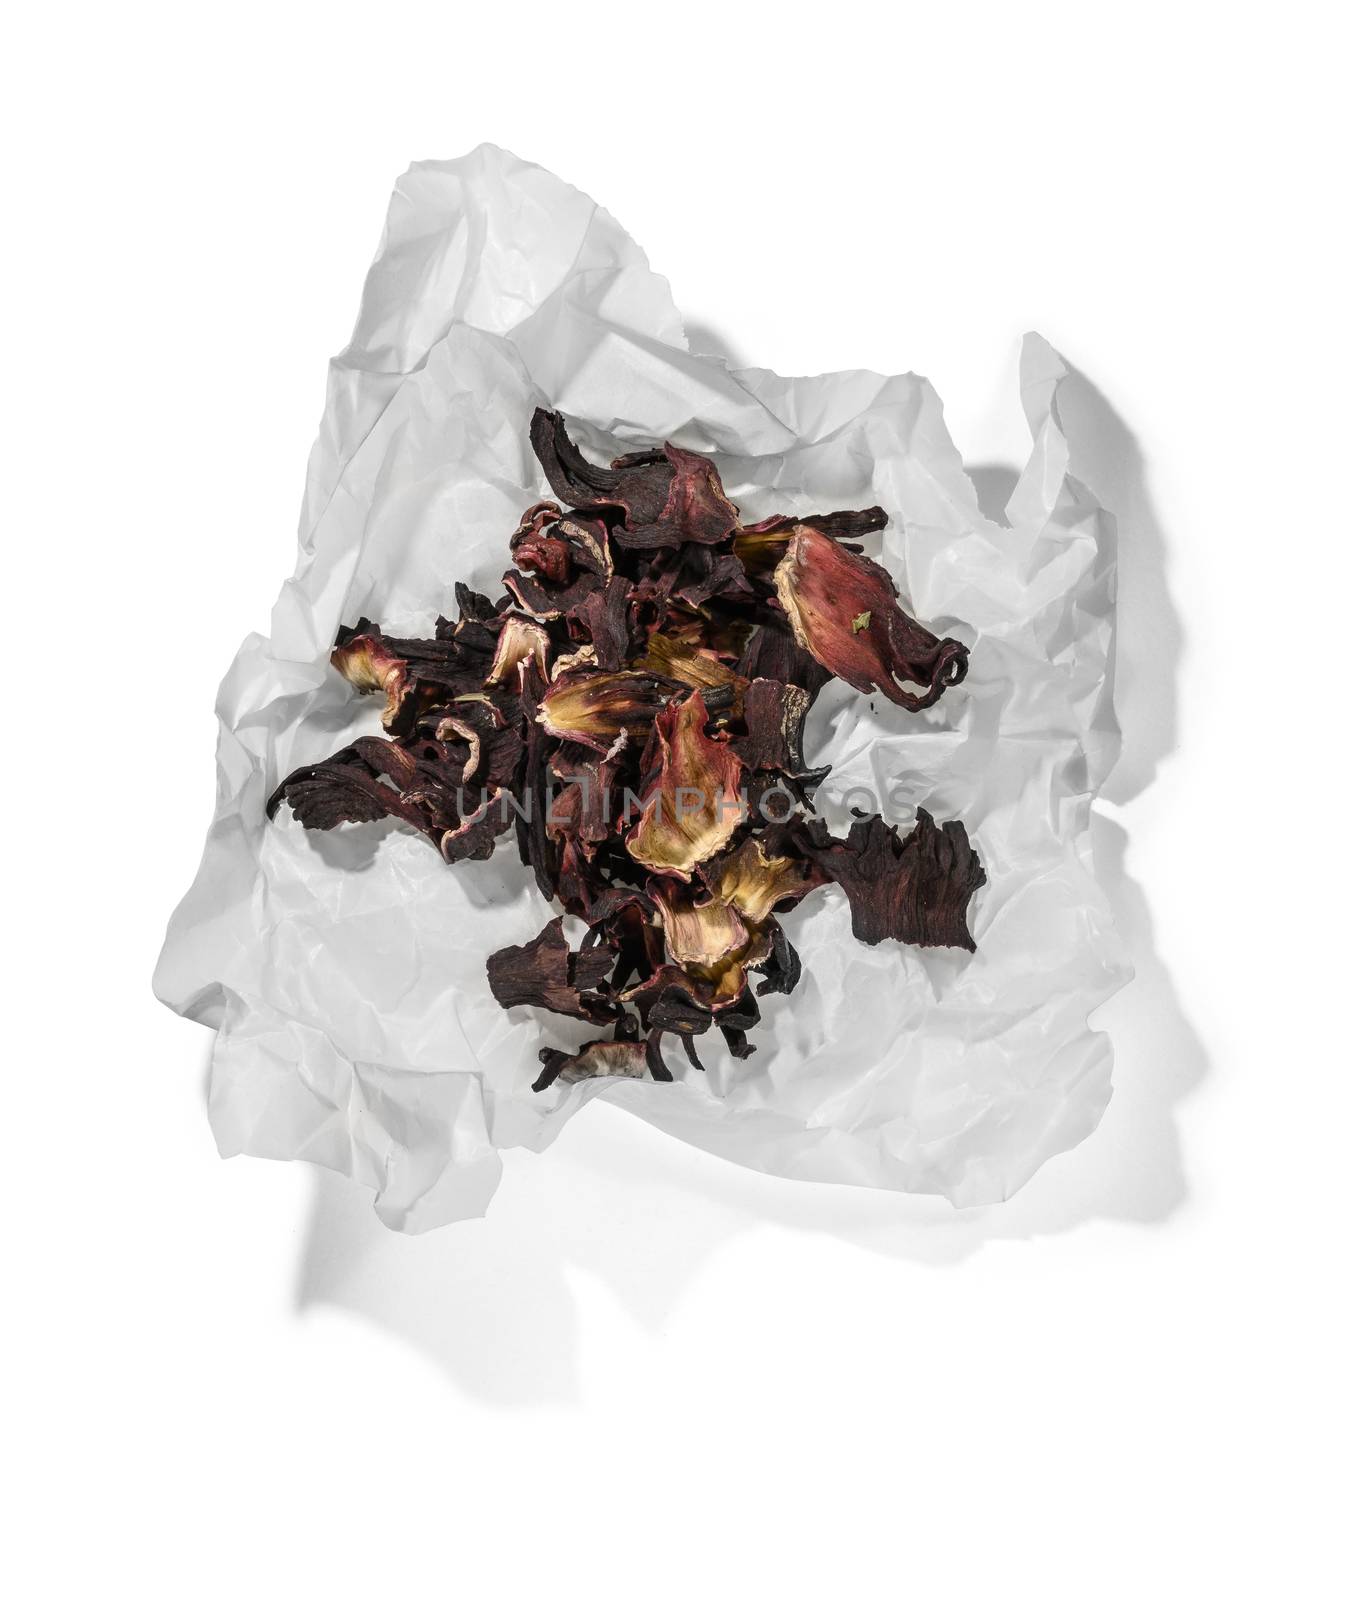 Hibiscus tea for making a drink on a white background.